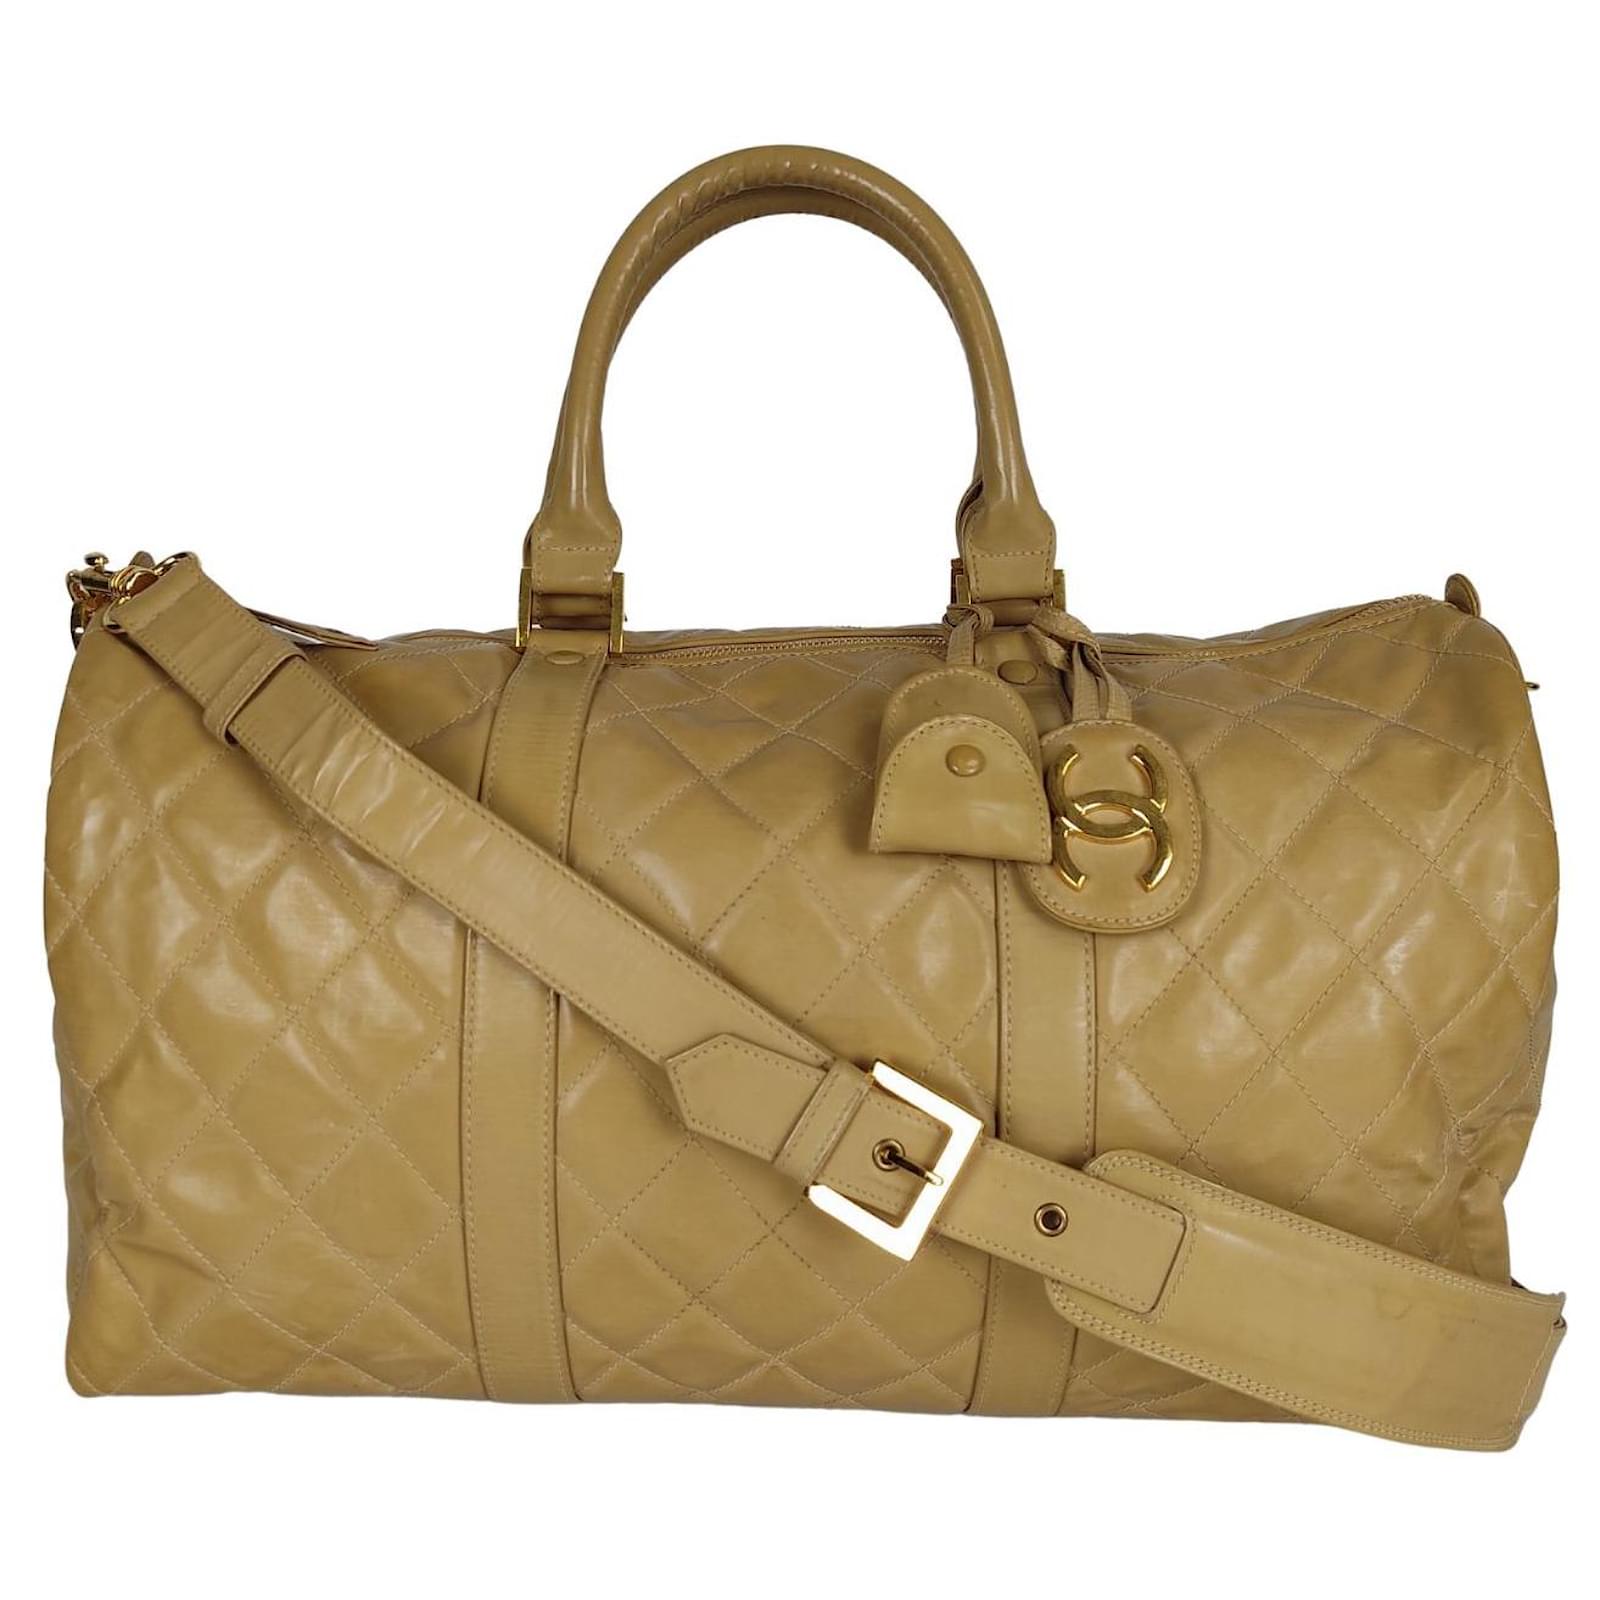 Travel Bag Chanel Chanel Quilted Travel Bag in Beige Patent Leather